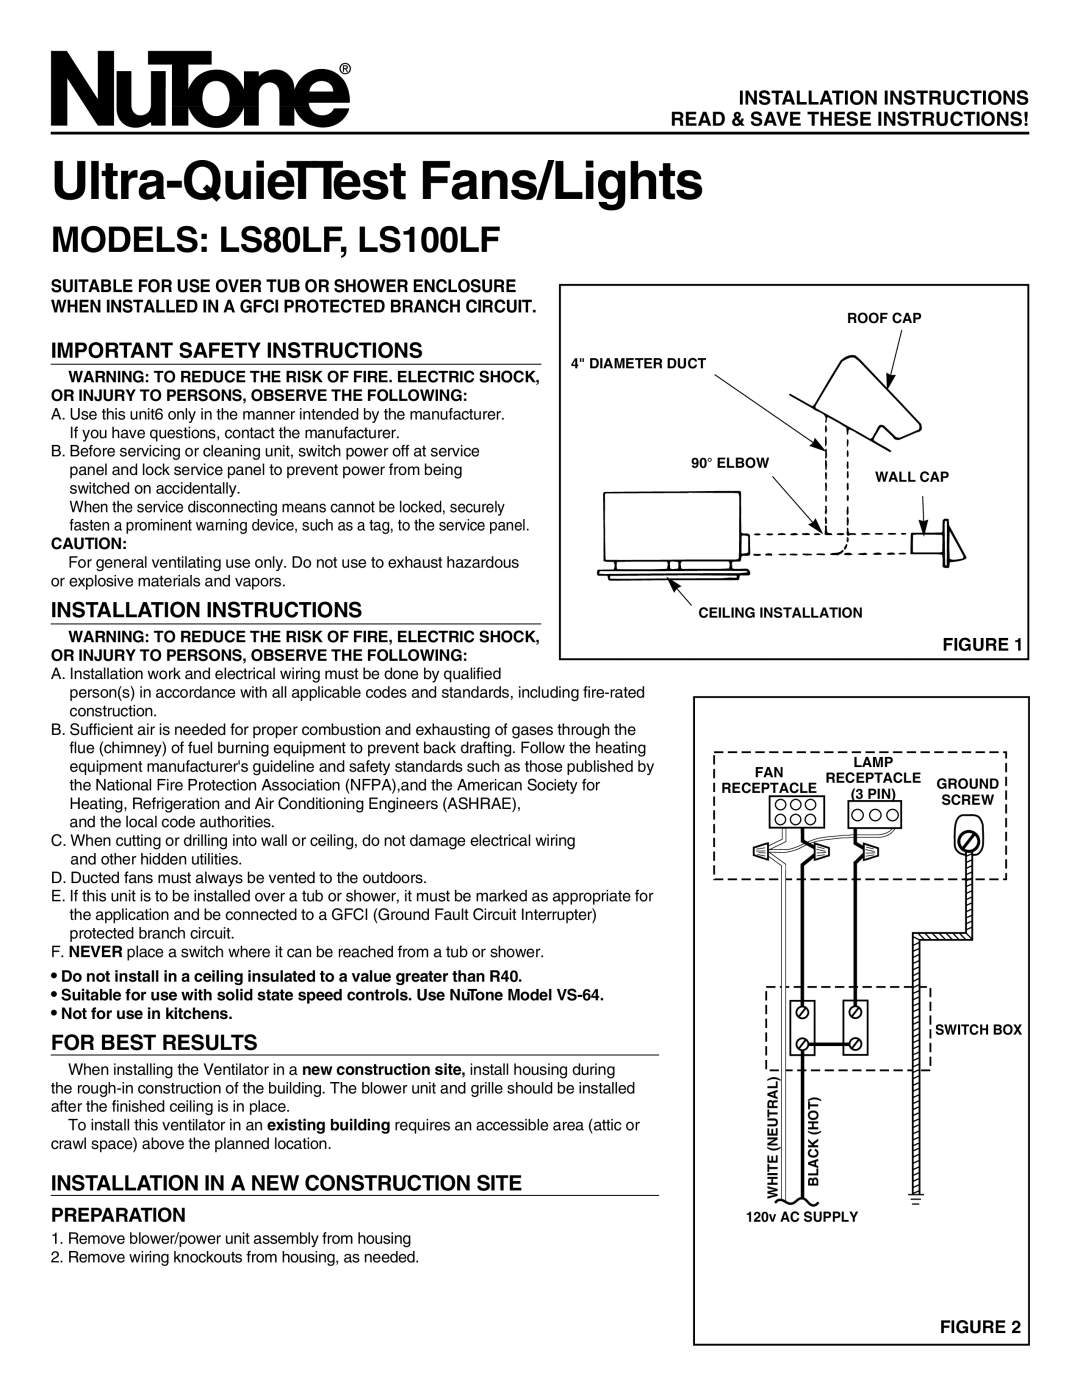 NuTone important safety instructions Ultra-QuieTTestFans/Lights, MODELS LS80LF, LS100LF, Important Safety Instructions 